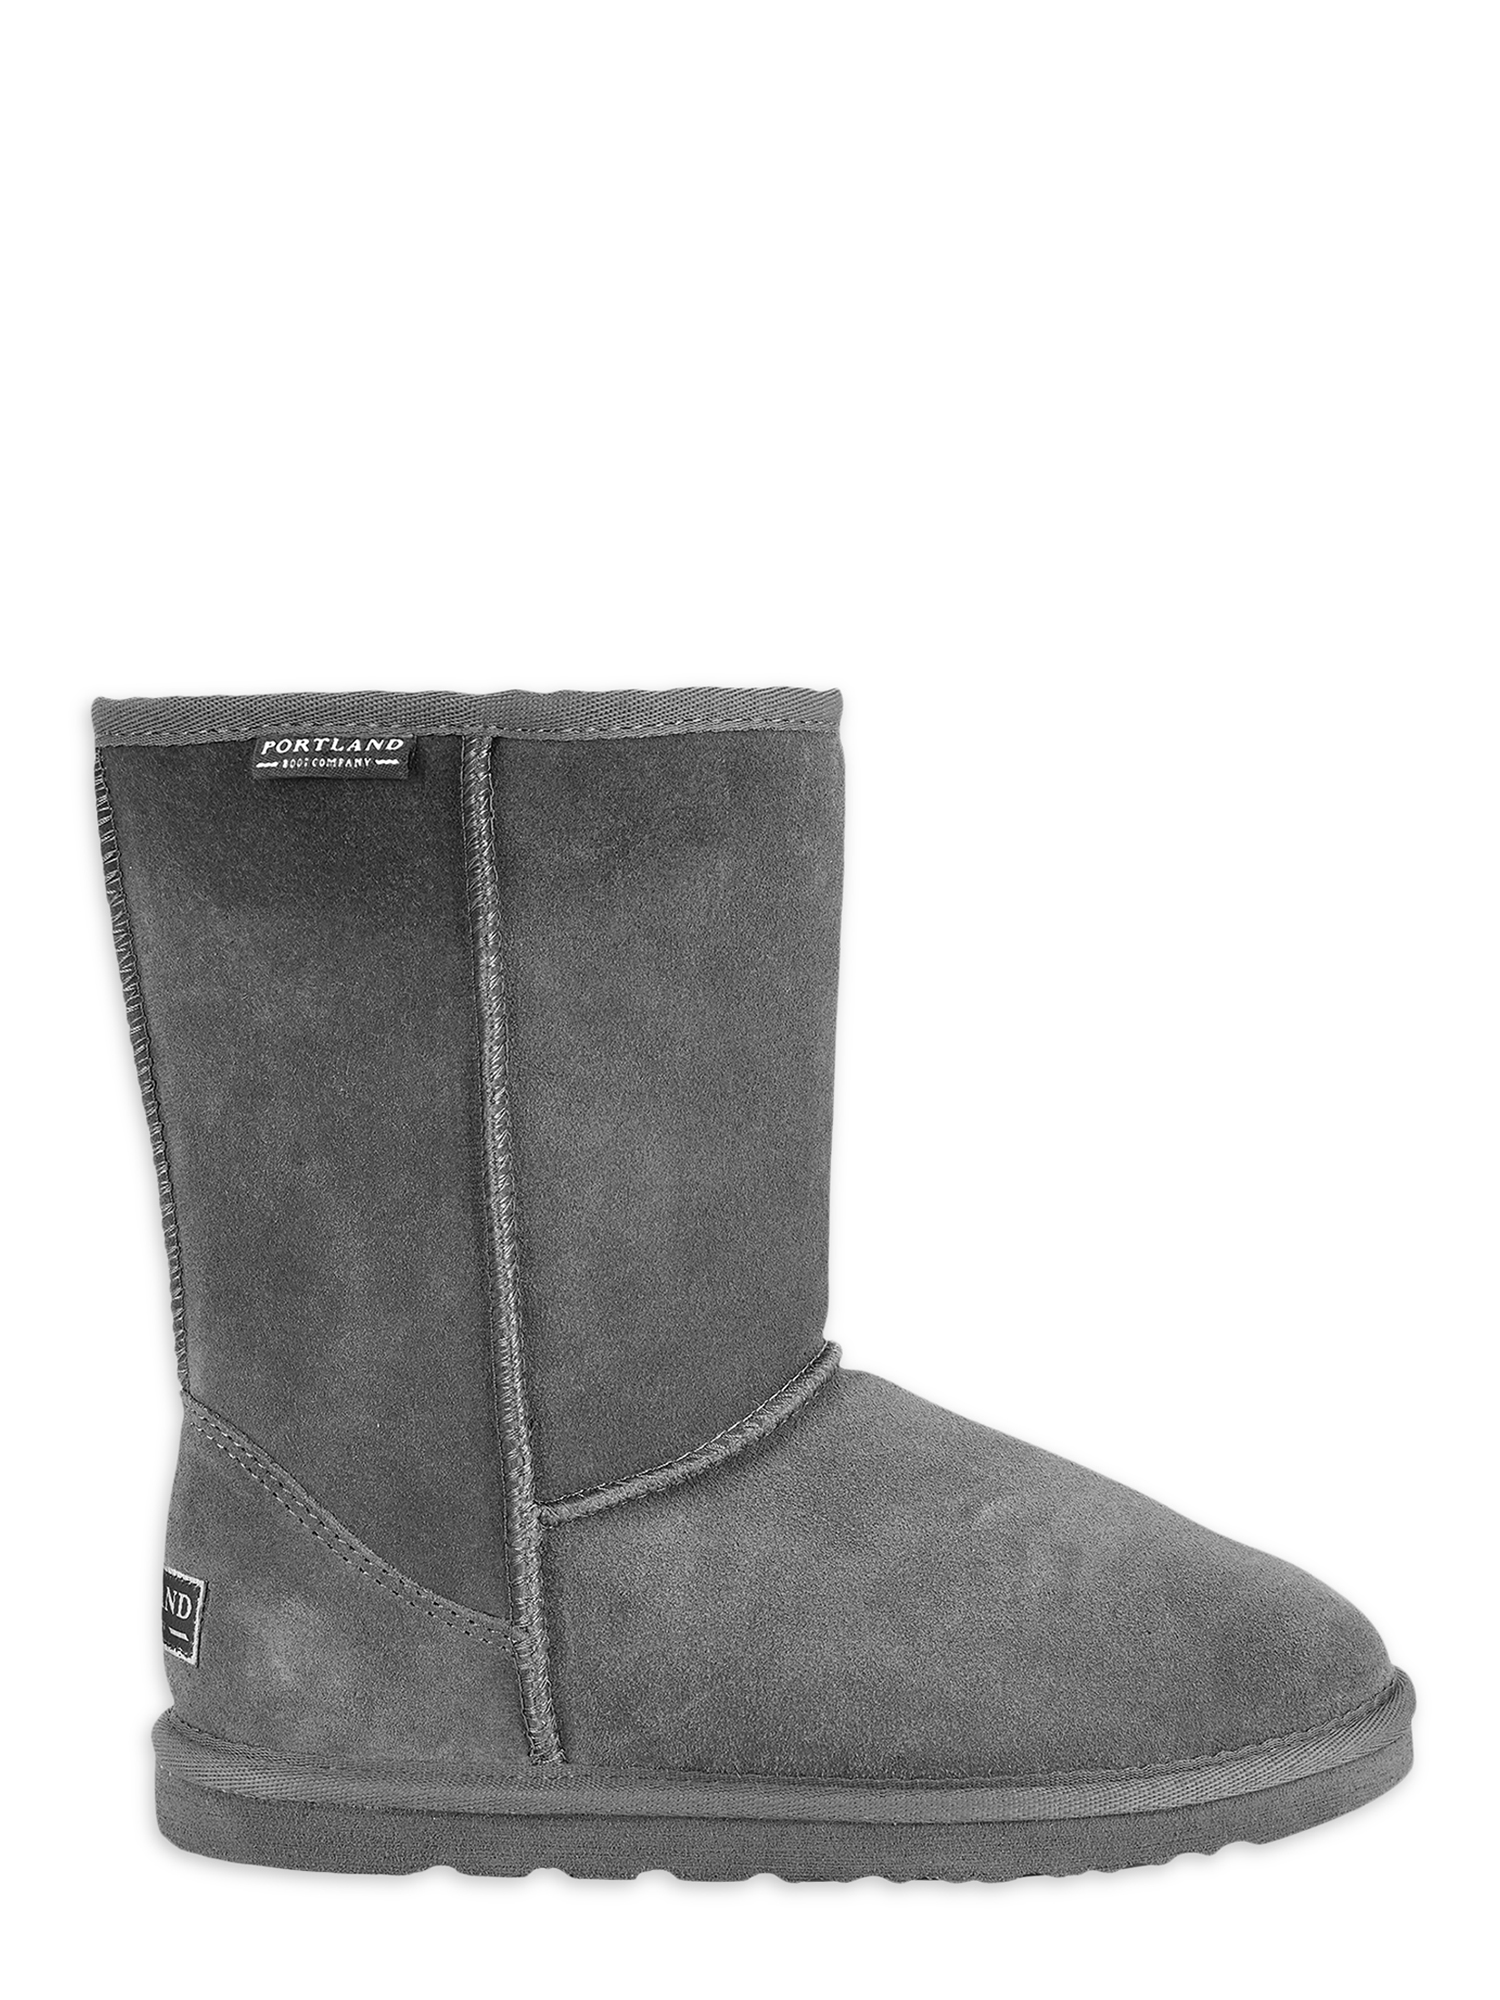 Portland Boot Company Women's Maryanne 8" Suede Winter Boot - image 5 of 5